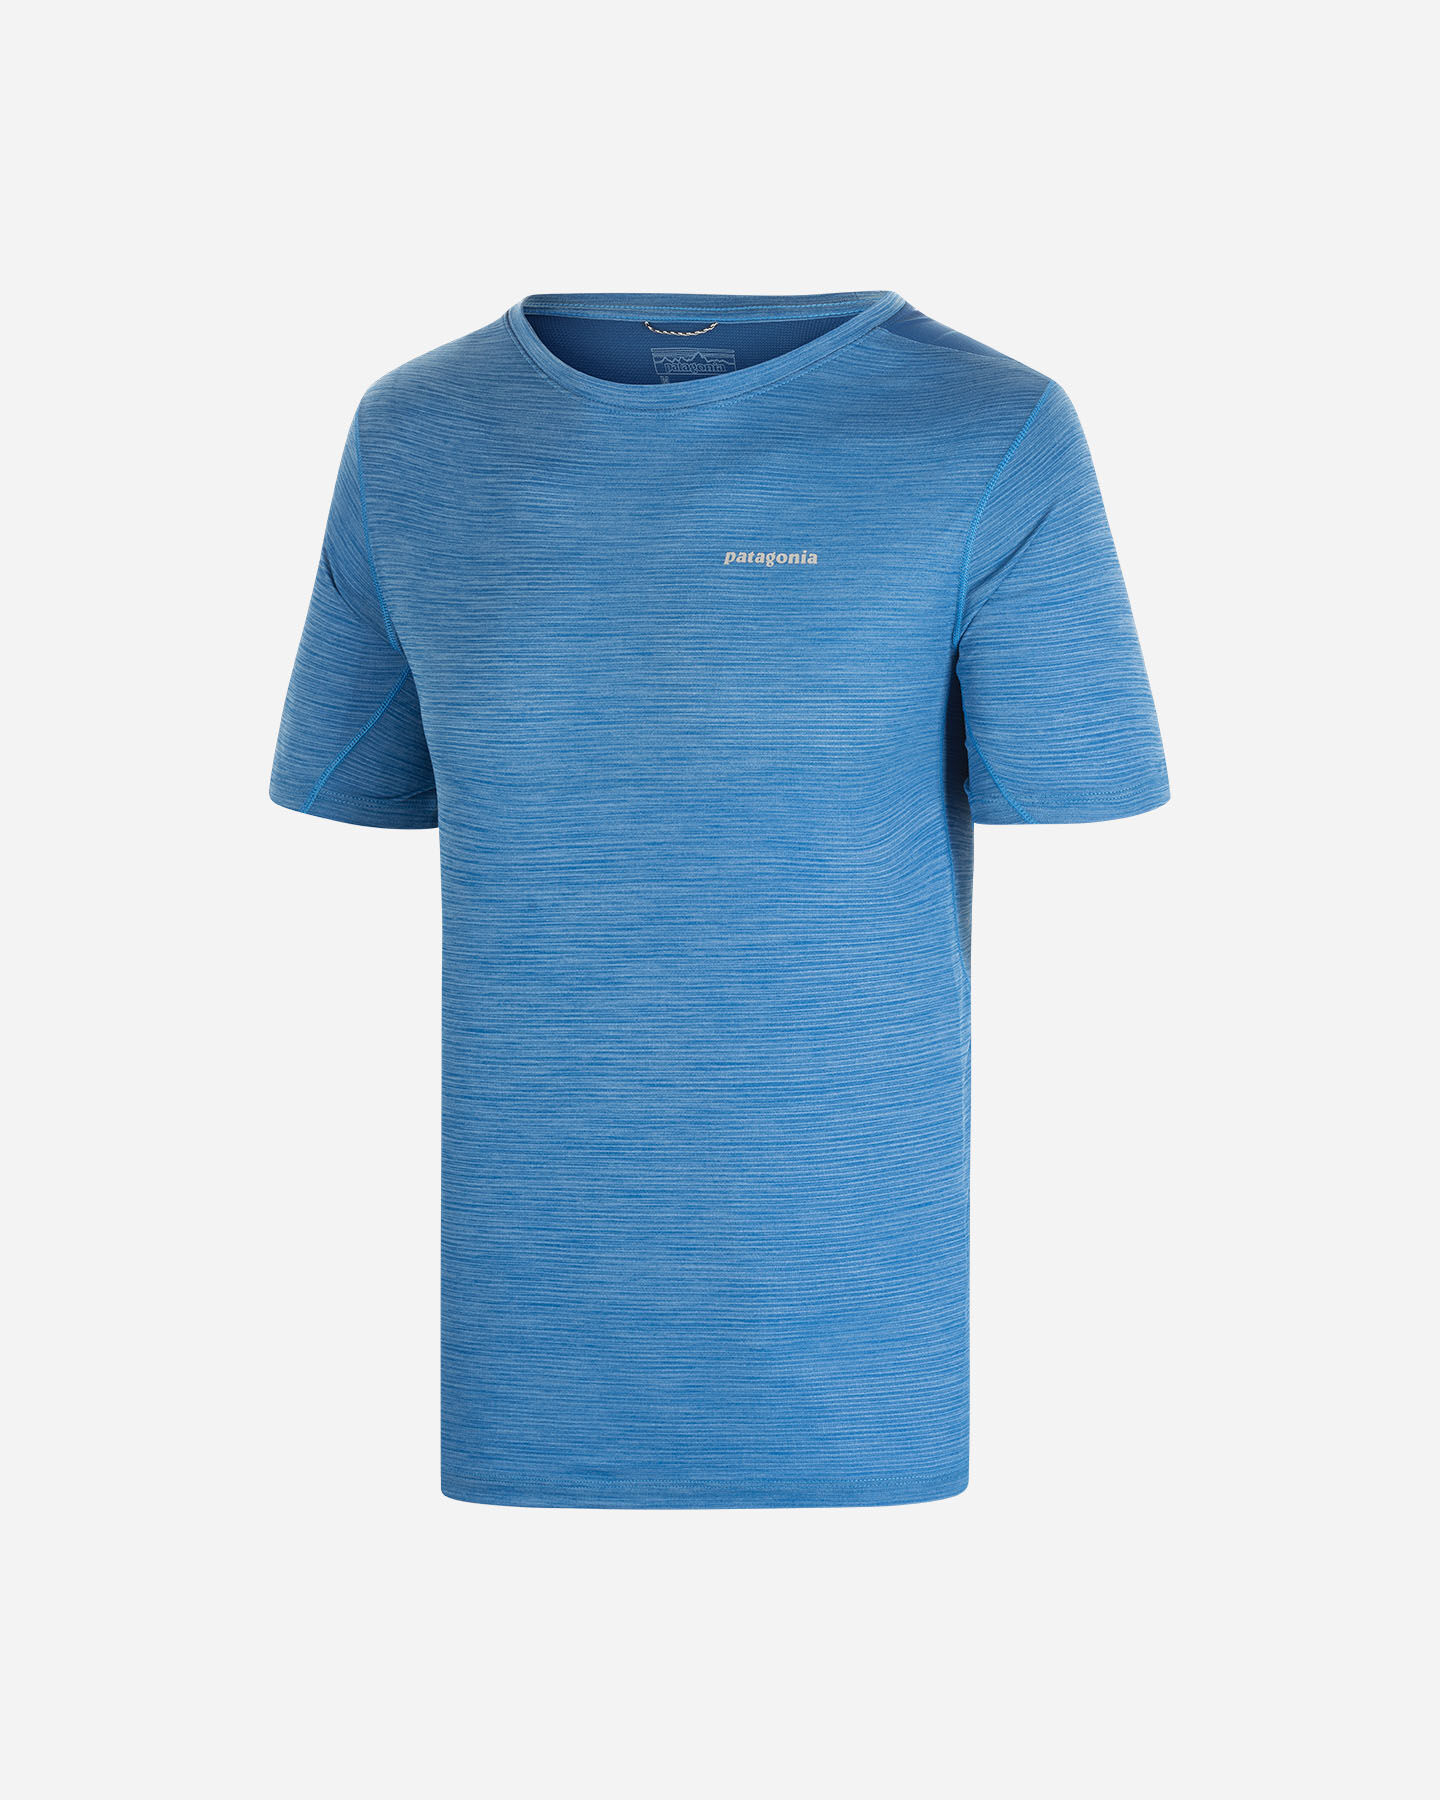  T-Shirt PATAGONIA PATAGONIA AIRCHASER M S4100919|SUPX|S scatto 0